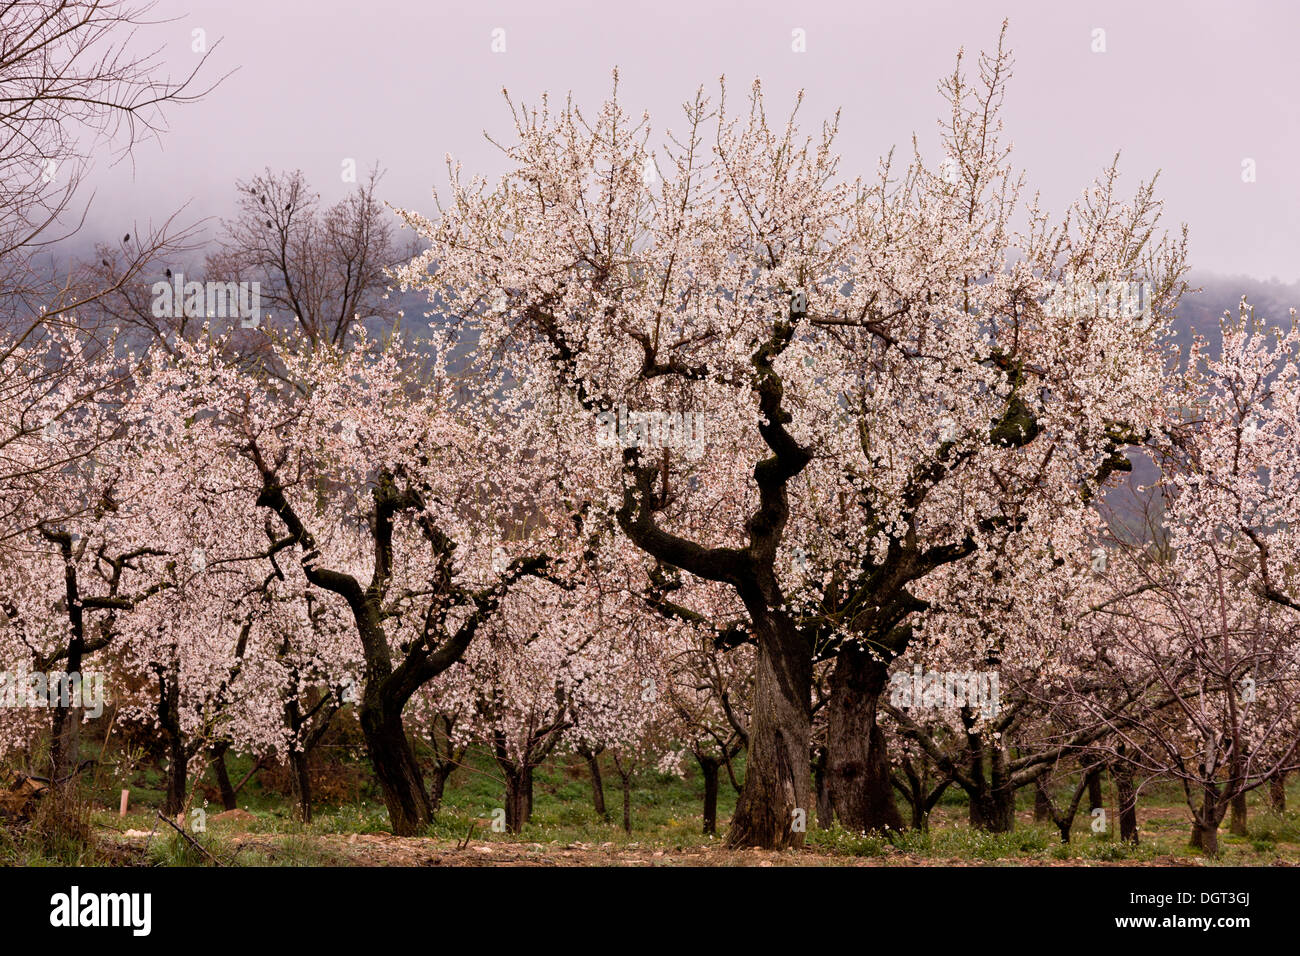 Almond, Prunus amygdalus, orchard at blossom time in early spring. Spain. Stock Photo